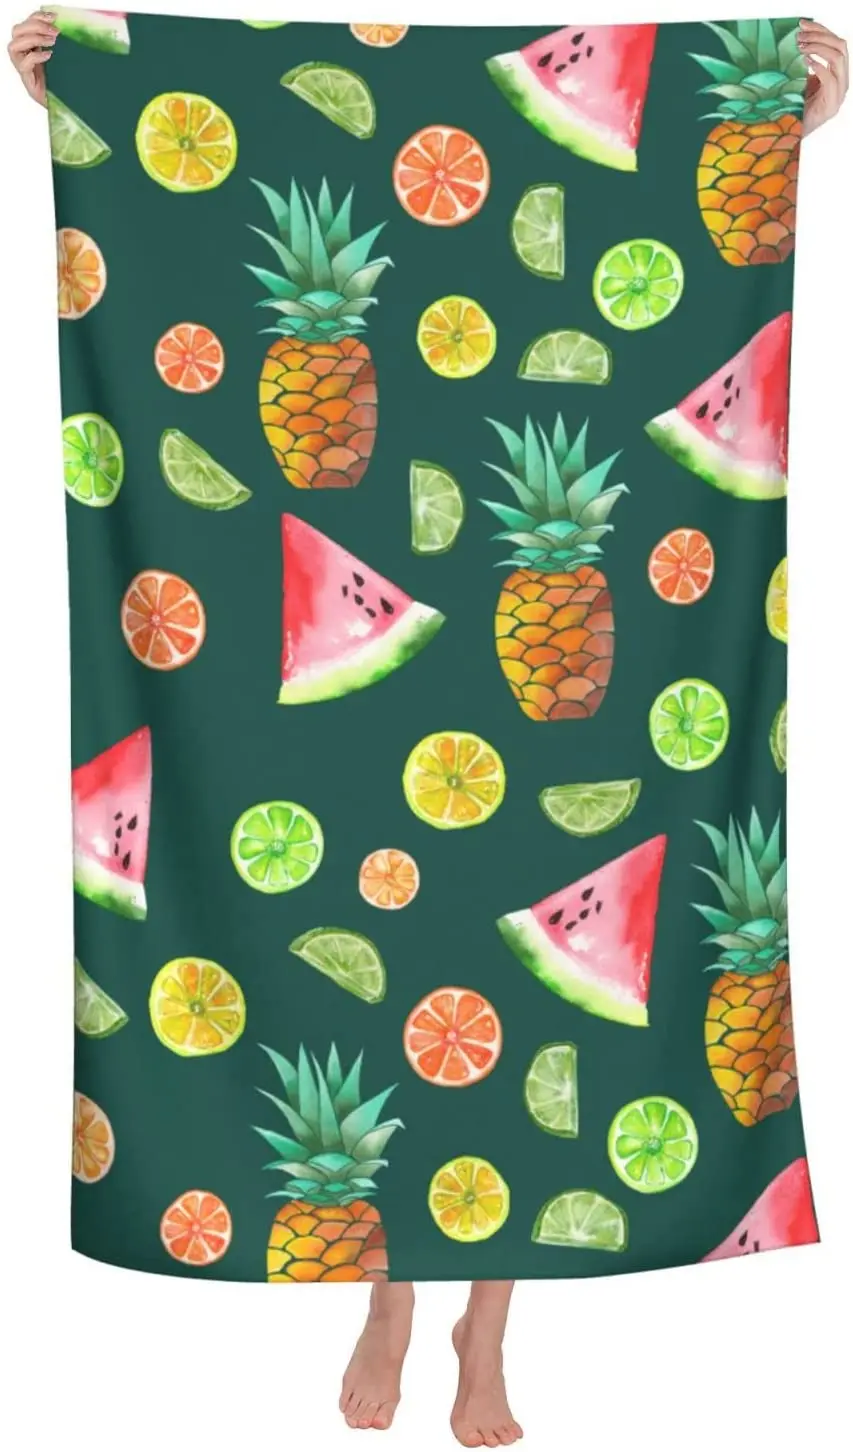 

Watermelon Beach Towel Summer Fruit Pineapple Beach Towels for Adults Beach Pool Spa Gym Travel Microfiber Large Novelty Travel